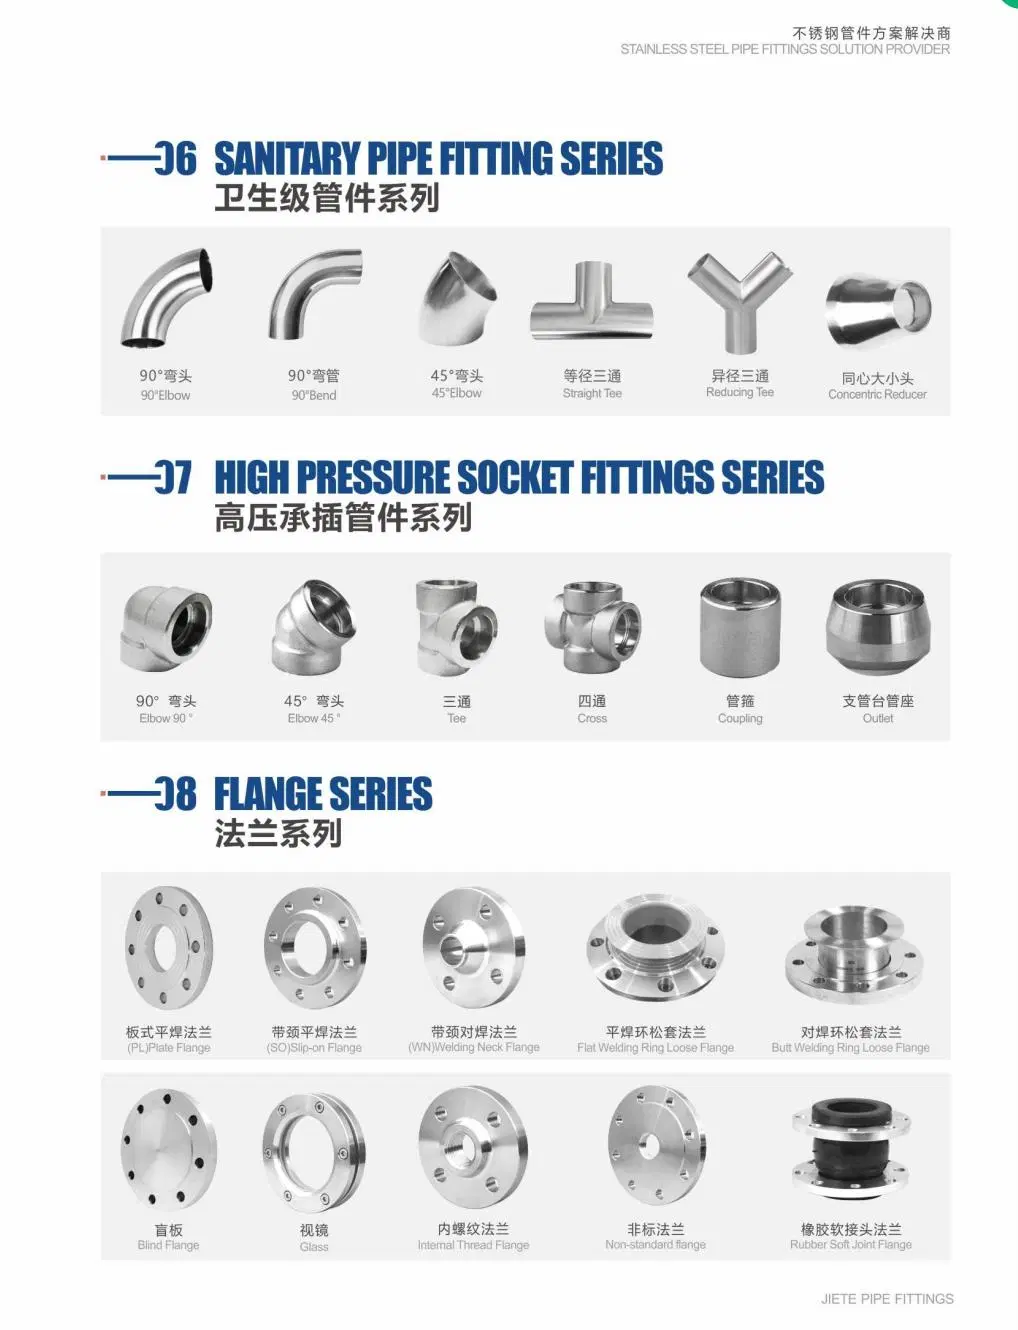 SS304 316 Pipe Fitting-Butt Welding Stainless Steel Straight Outlet Tee